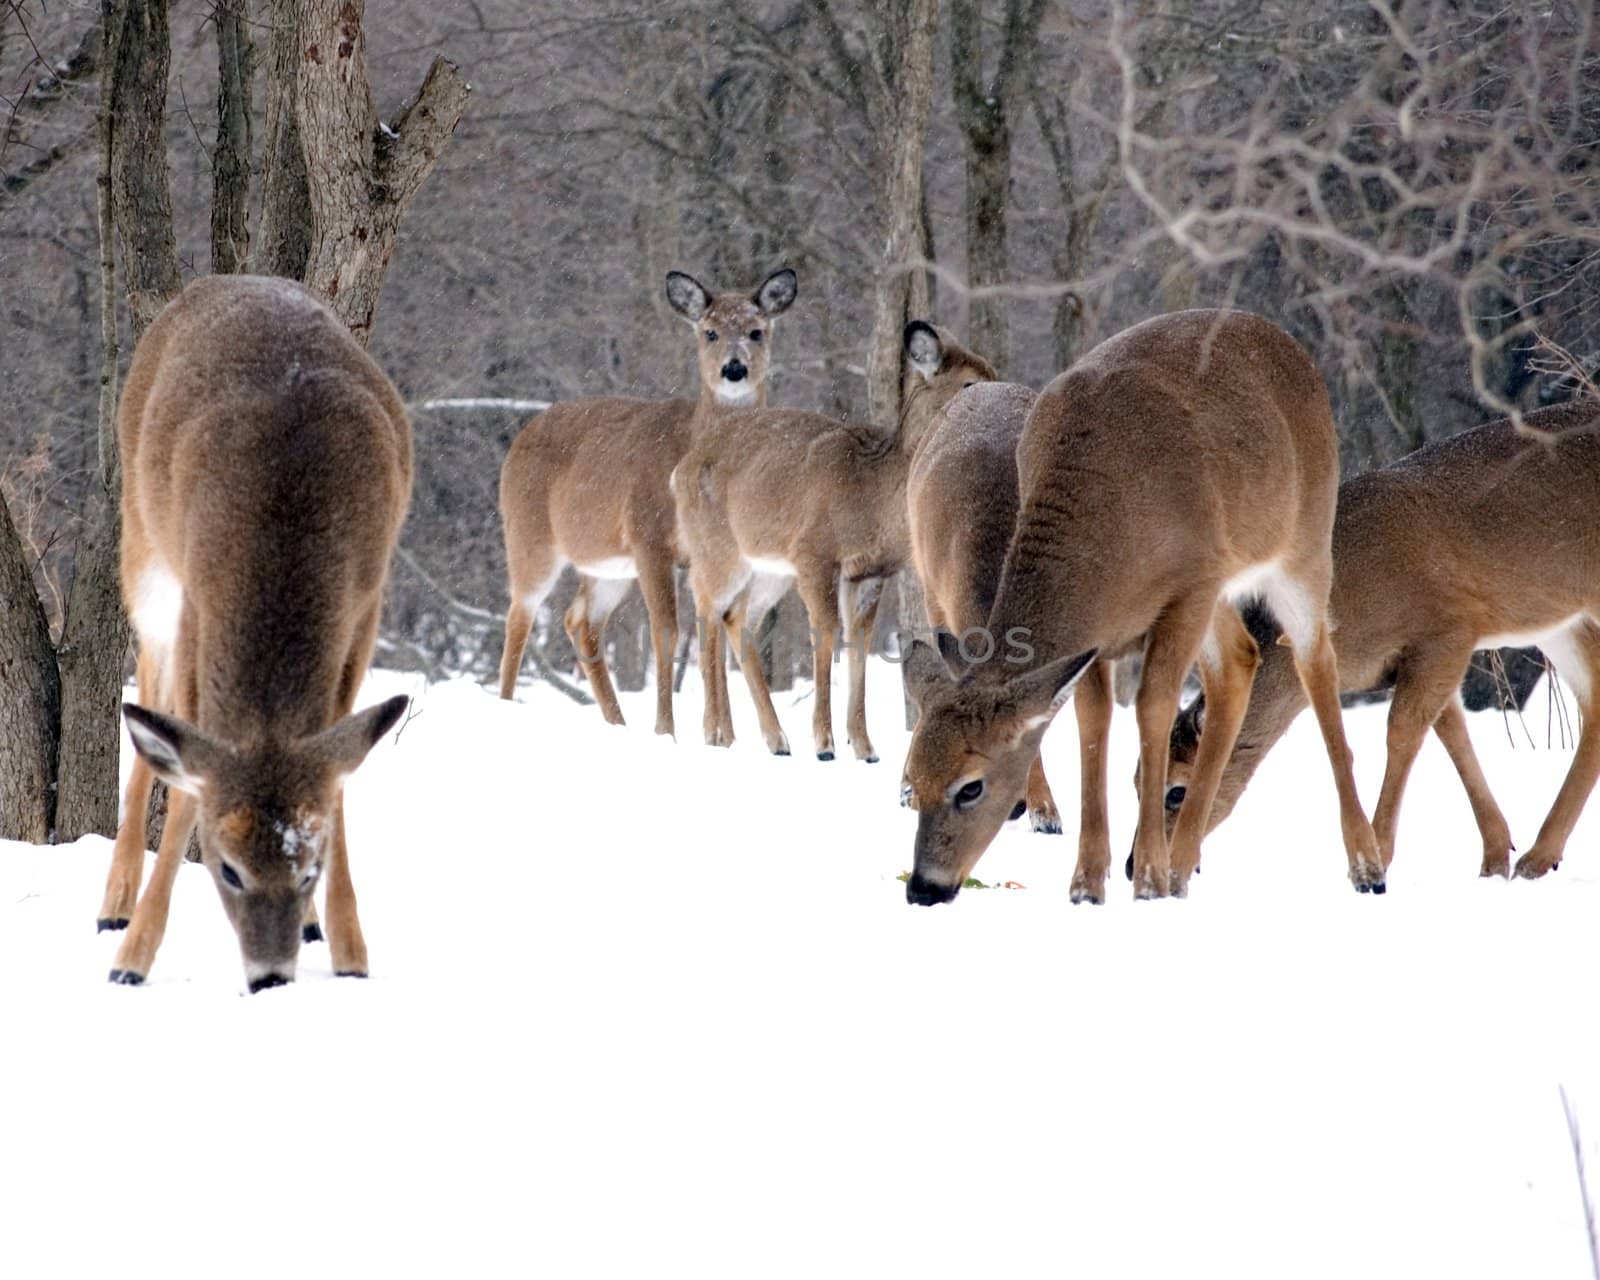 A herd of whitetail deer does browsing for food in the winter snow.